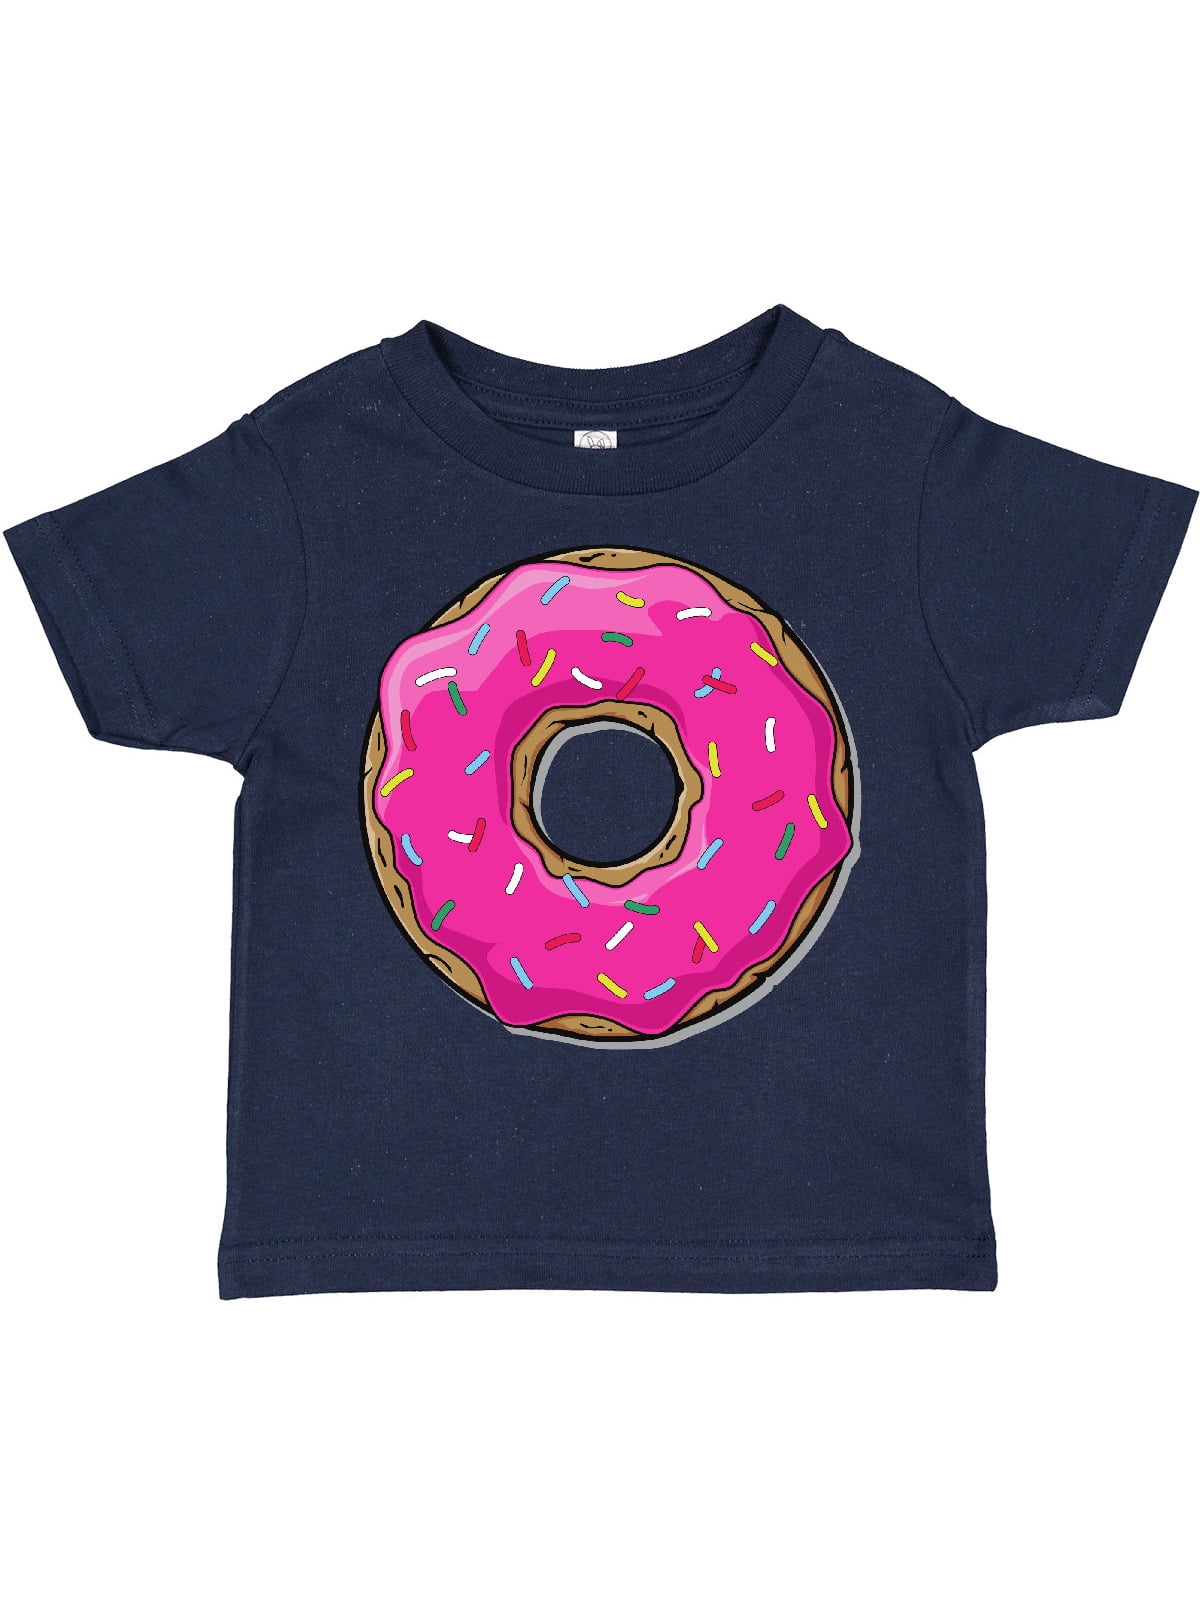 2nd 4th Vanilla Donut with Sprinkles Girl Birthday Shirt; 1st 5th Birthday Shirt; Turquoise and Red Themed Girl Birthday Party 3rd